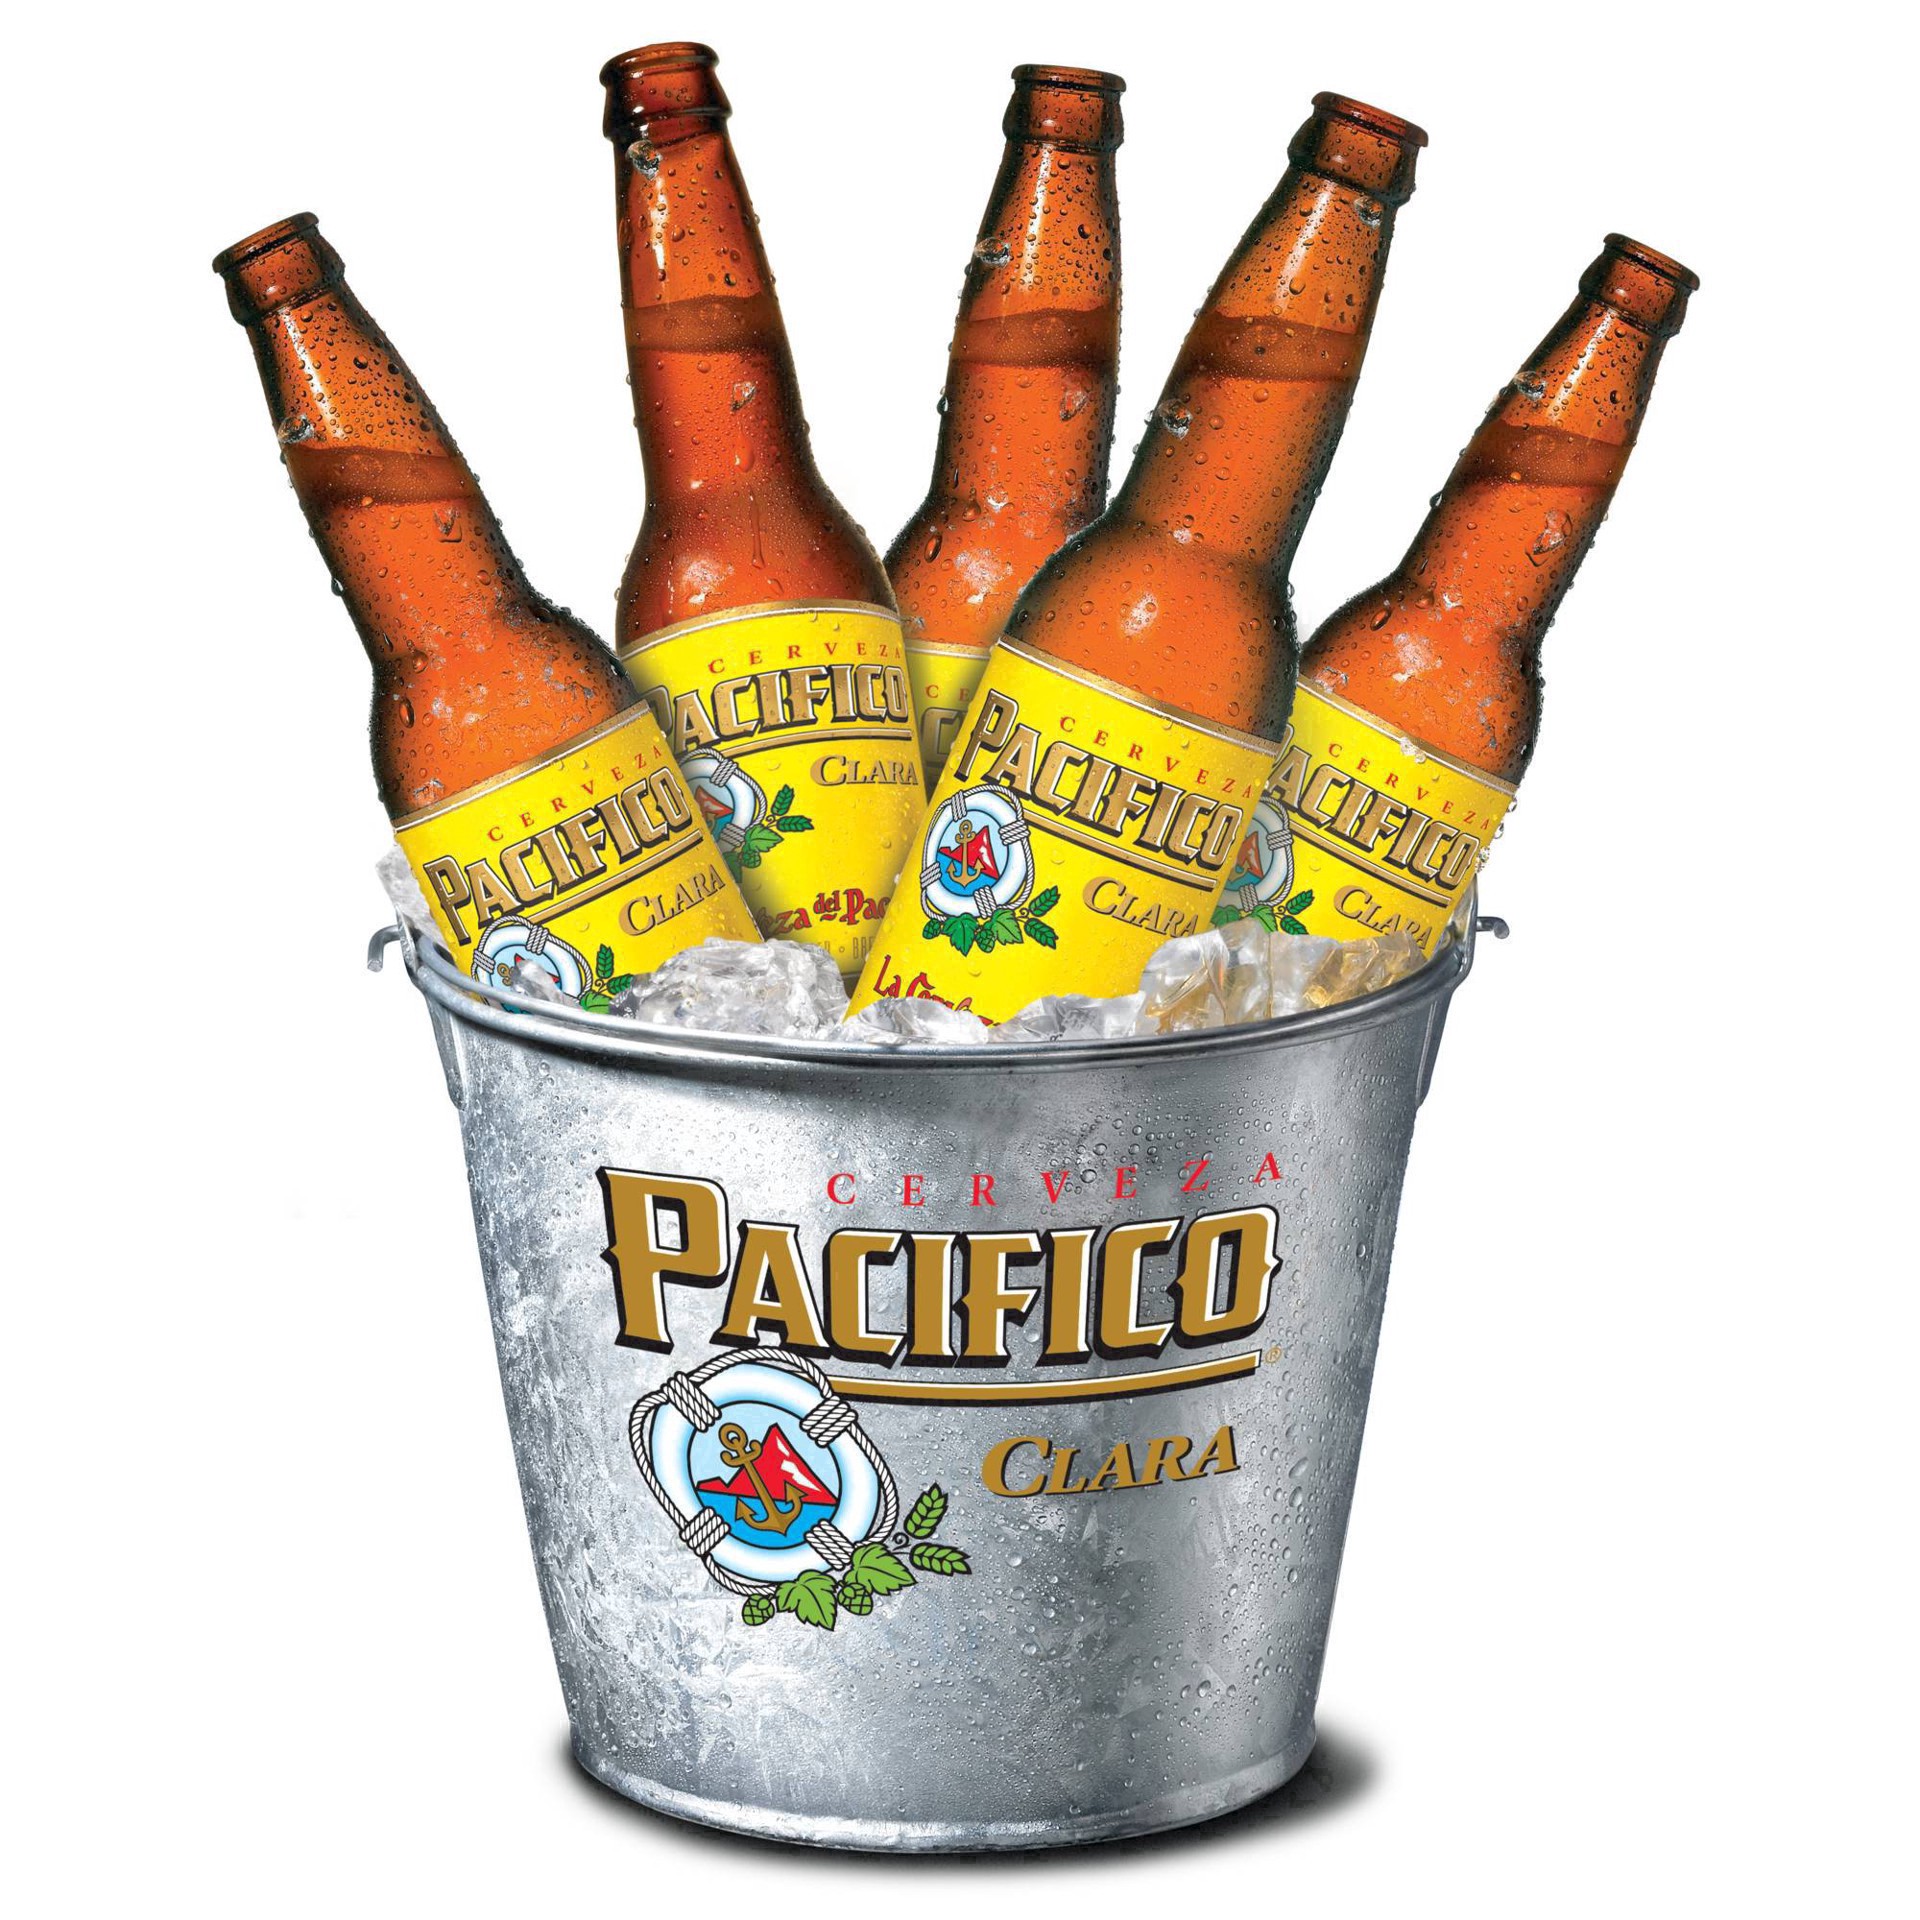 slide 53 of 79, Pacifico Clara Lager Mexican Beer Bottles, 12 ct; 12 oz